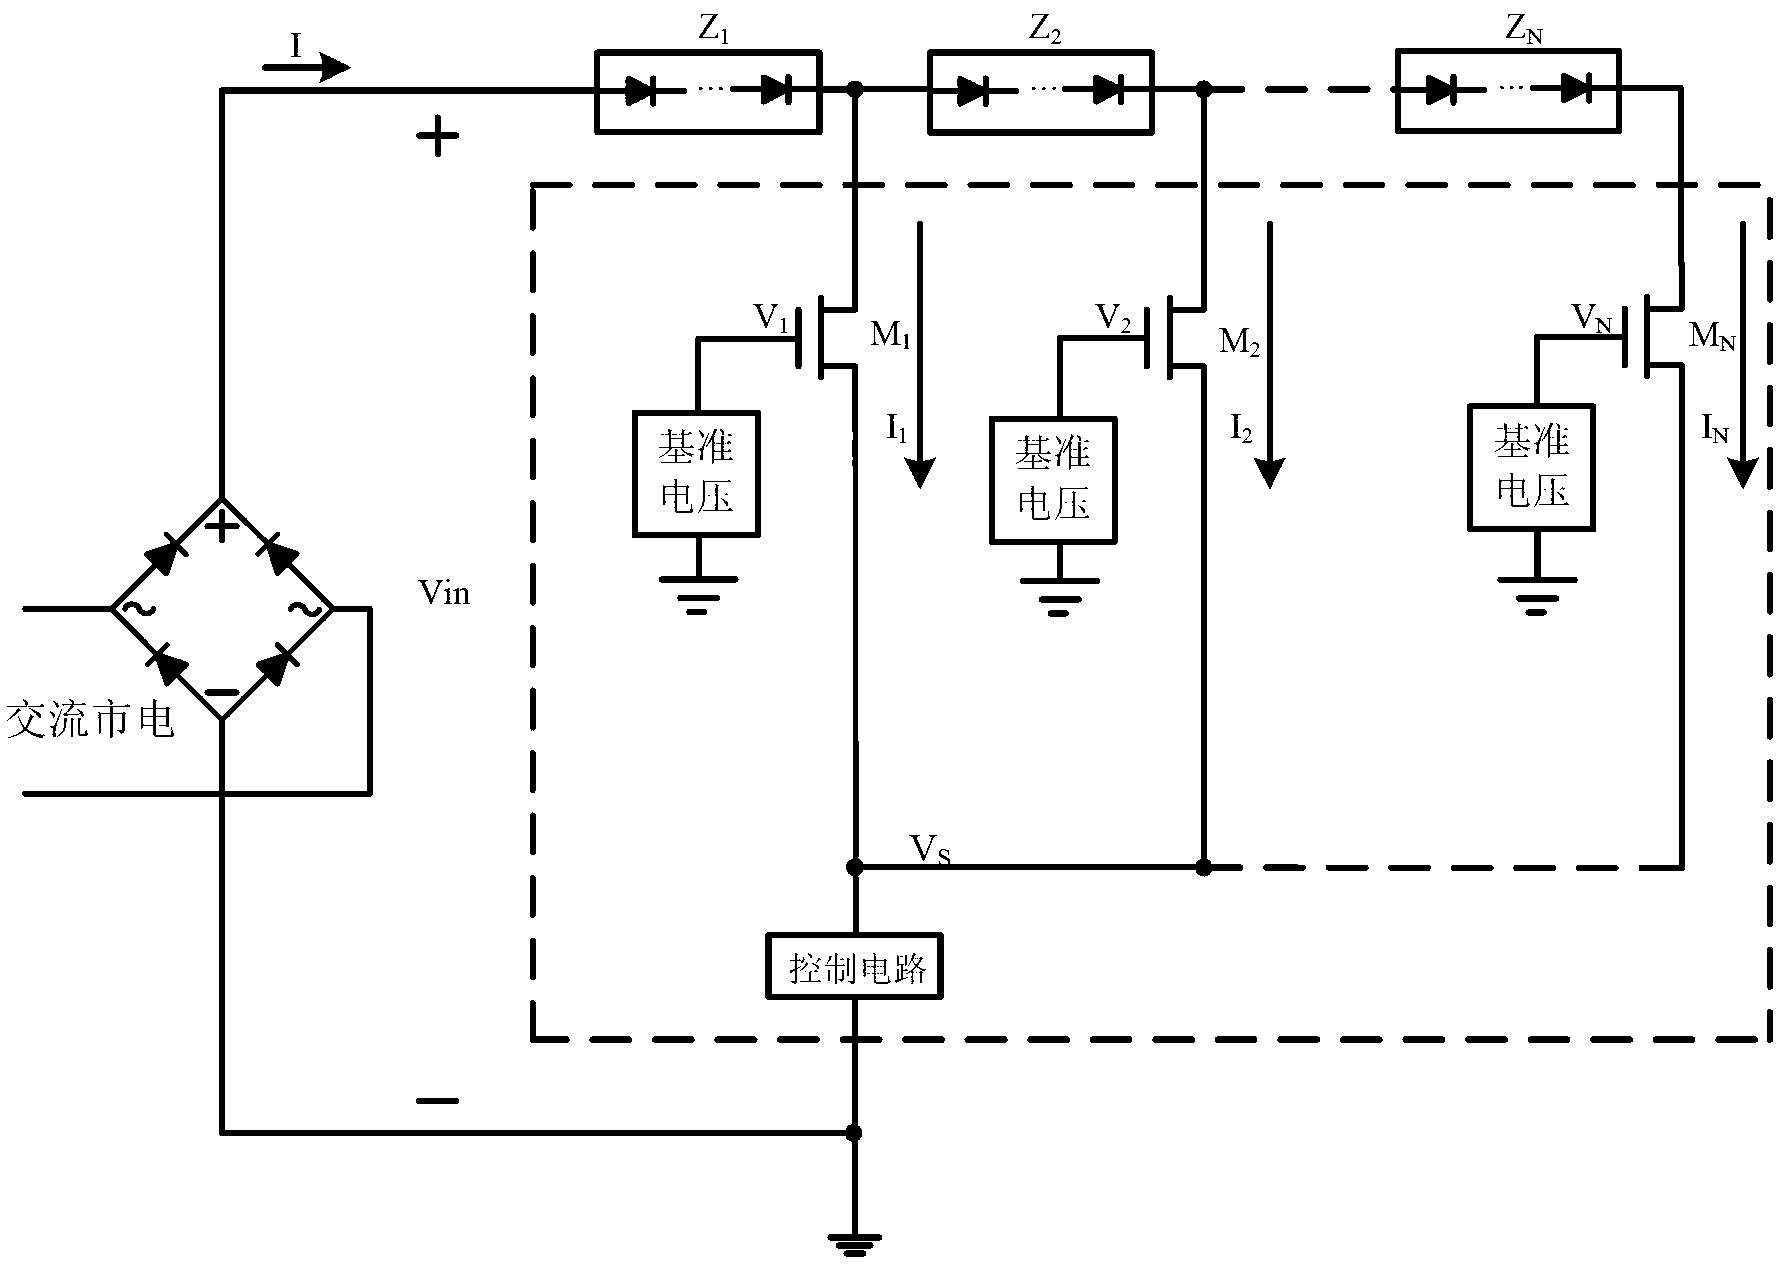 Light emitting diode (LED) drive circuit controlled by parallel connection high voltage metal oxide semiconductor (MOS) tube